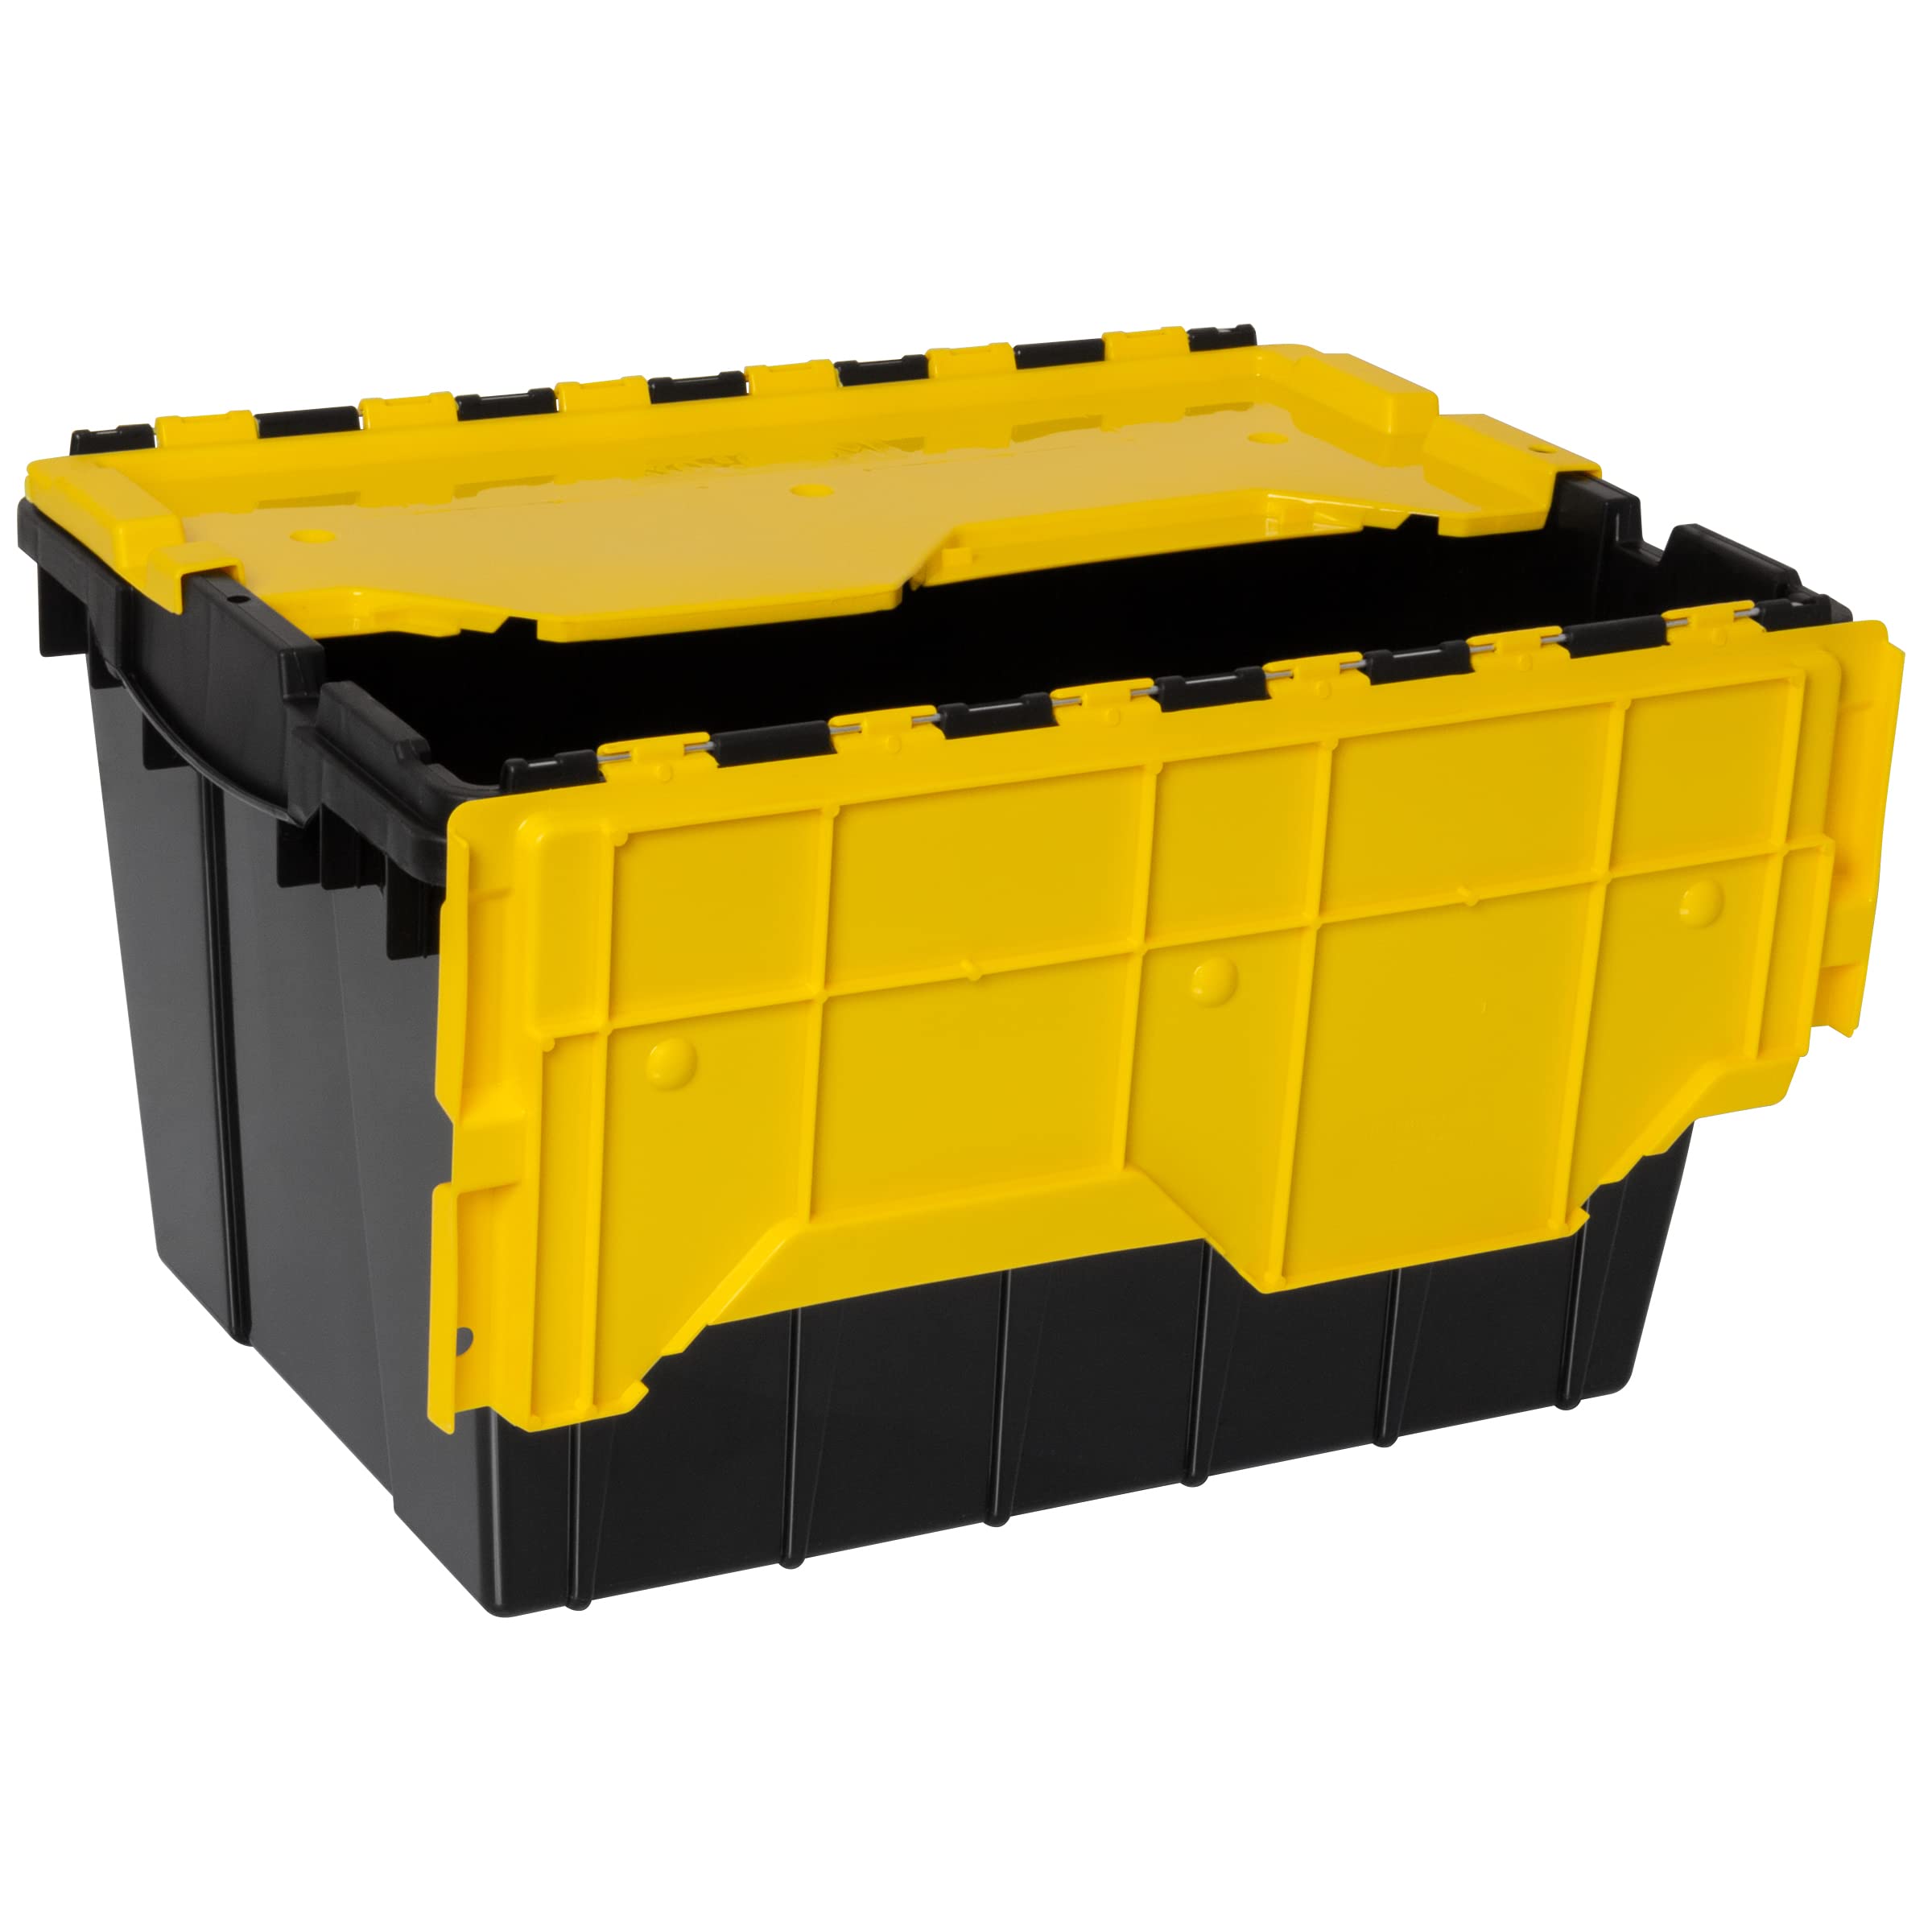 Akro-Mils 66486 12-Gallon Plastic Stackable Storage Keepbox Tote Container with Attached Hinged Lid, 21-1/2-Inch x 15-Inch x 12-1/2-Inch, Black/Yellow